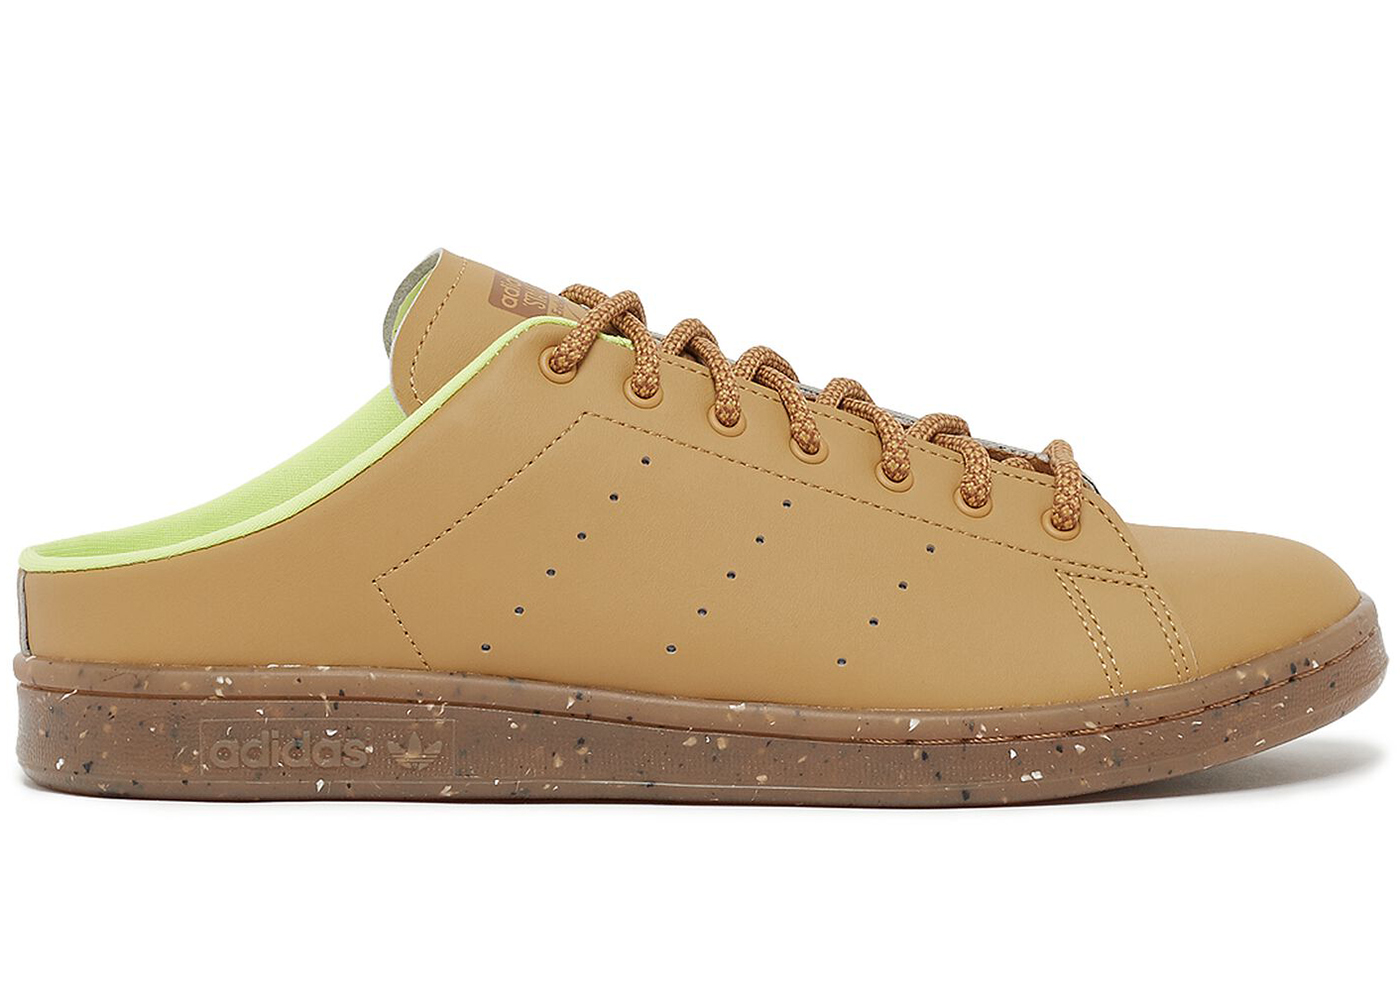 adidas Stan Smith Mule Plant and Grow Golden Beige Men's - GY9666 - US